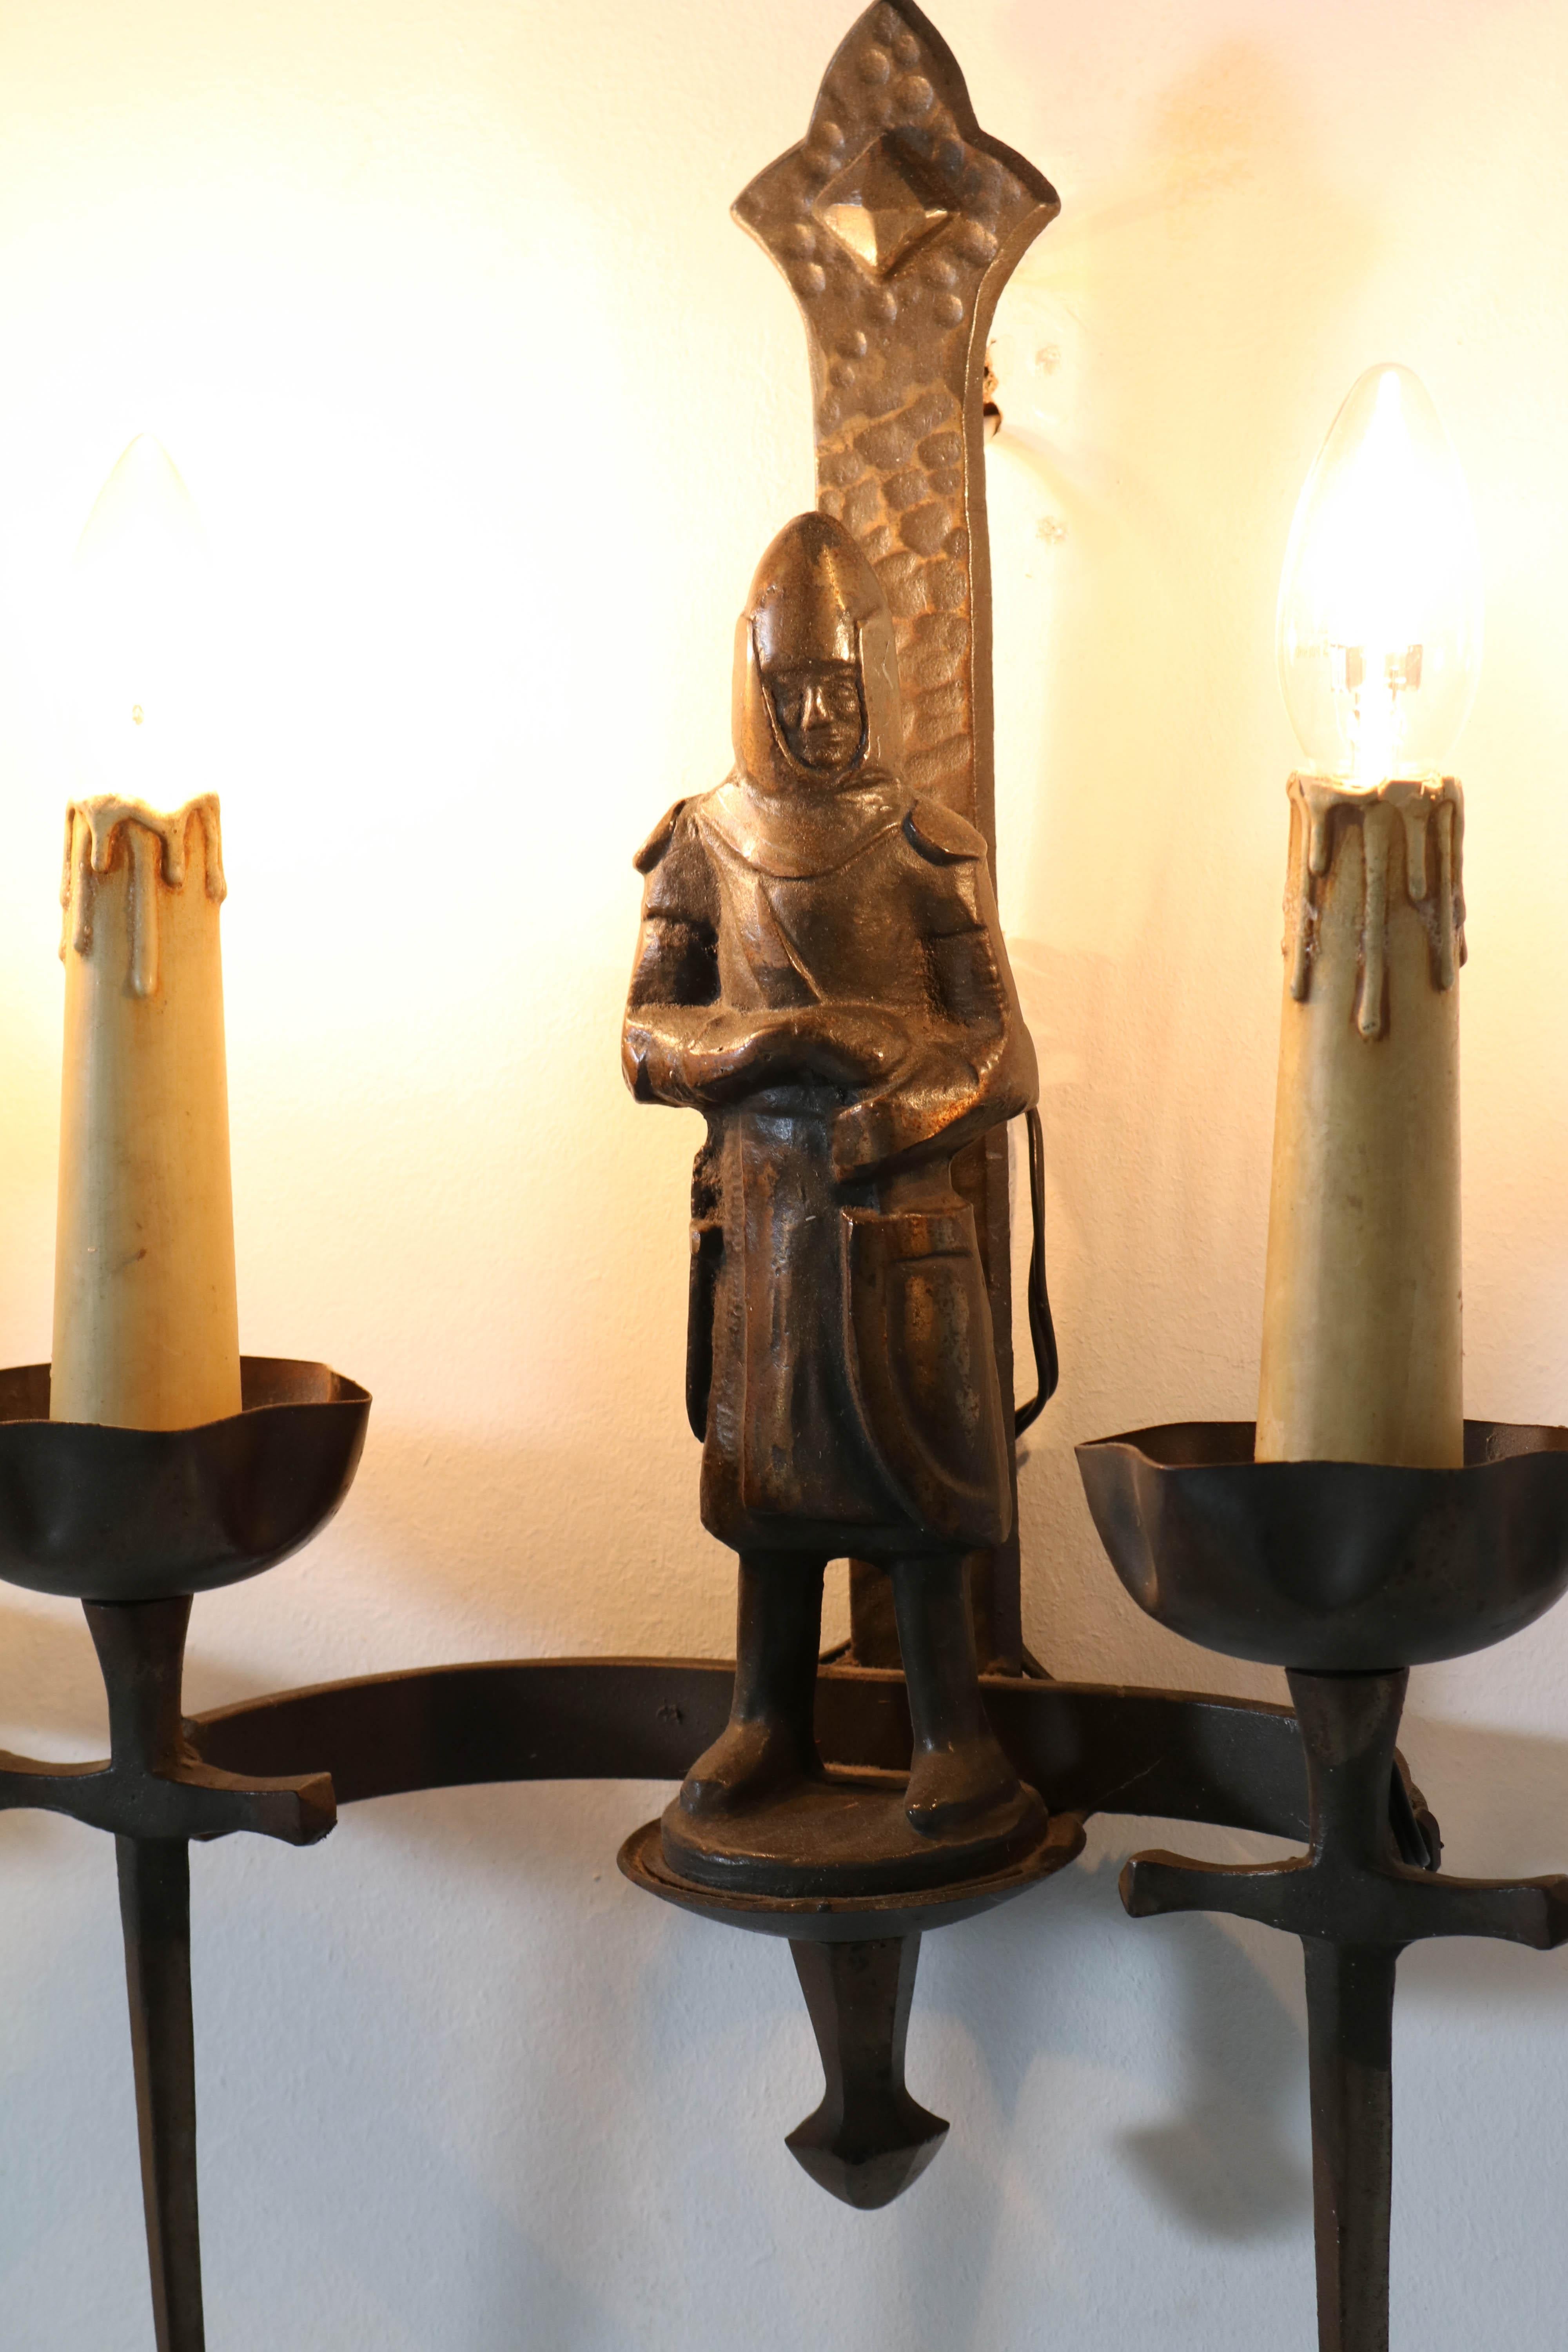 Mid-20th Century French Gothic Revival Bronzed Knights with Swords Wall Lights or Sconses